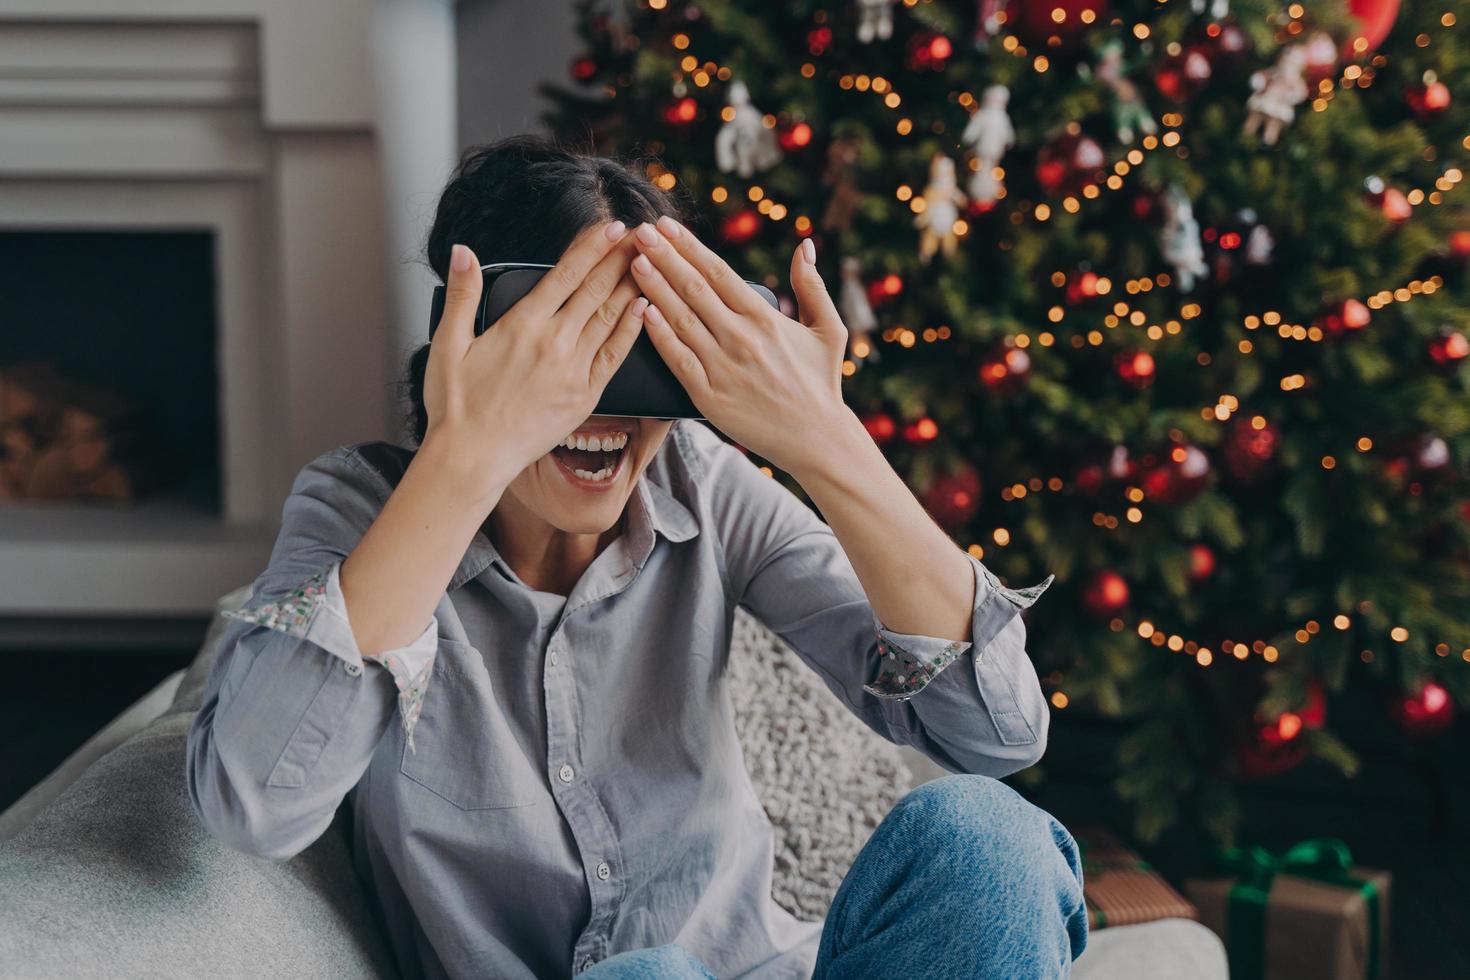 Joyful young woman in VR headset glasses sitting on cozy sofa next to decorated Xmas tree at home photo